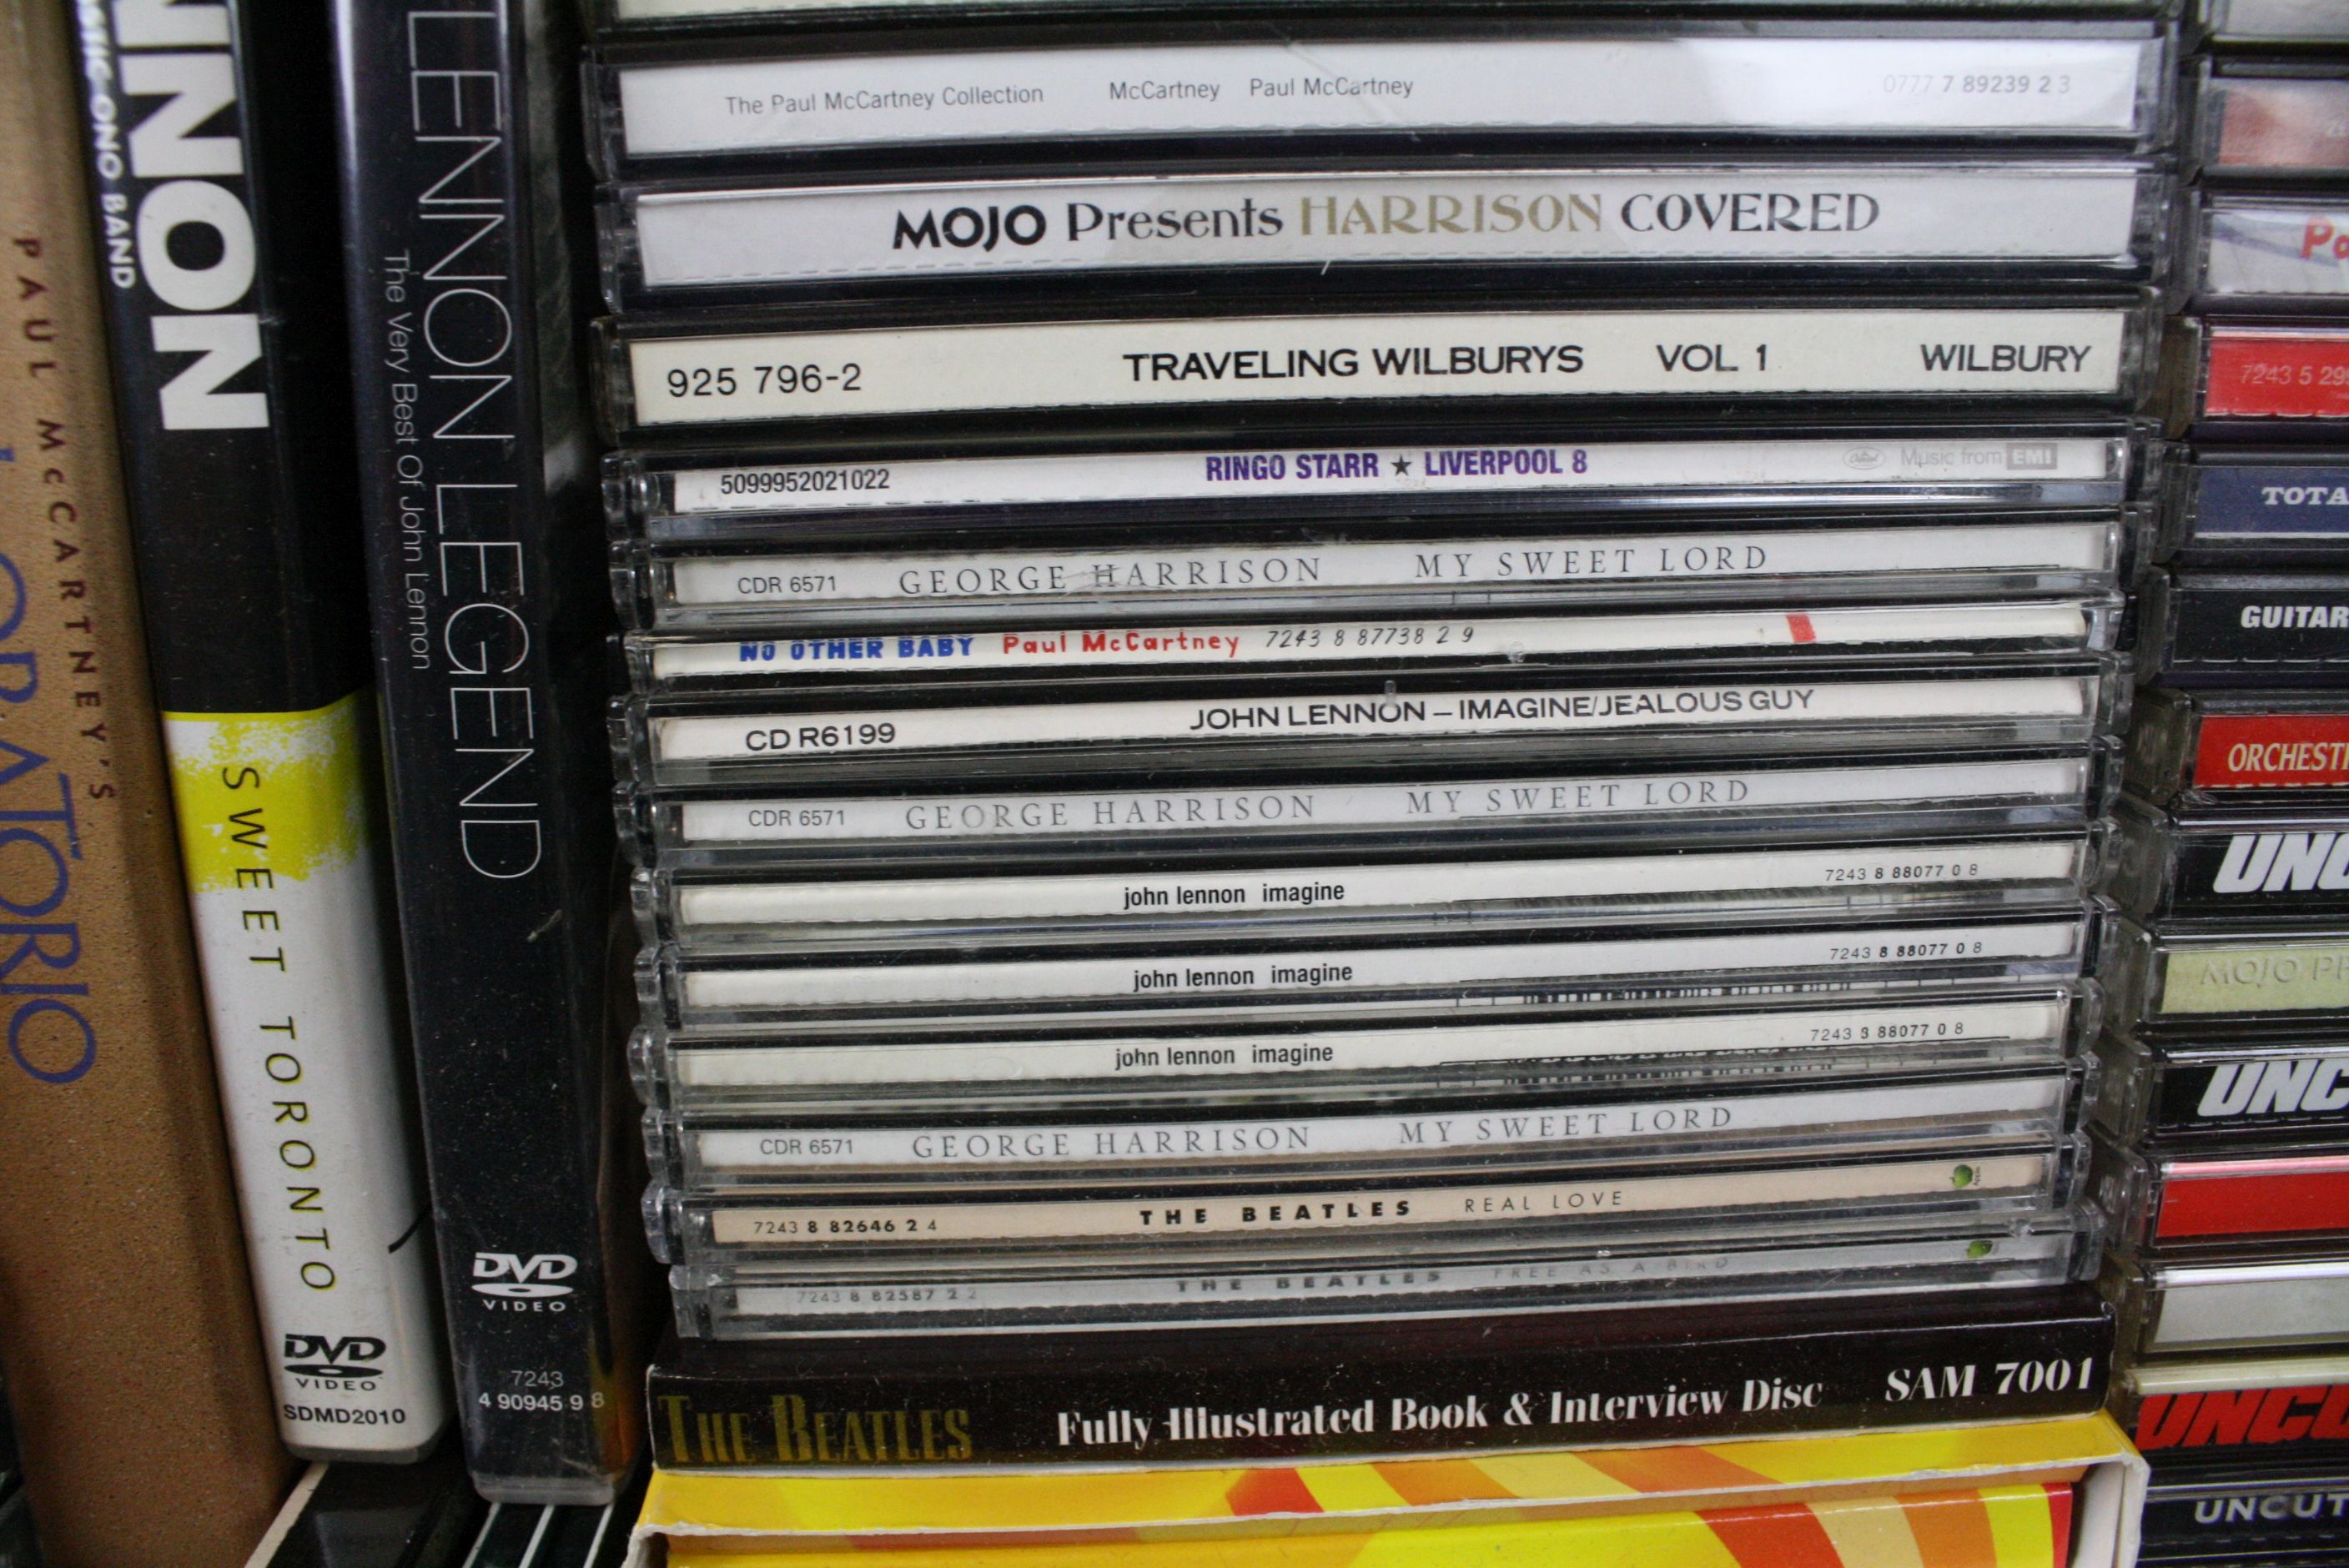 CDs - Over 150 Beatles and related CD's including imports, box sets, singles, giveaways, private - Image 11 of 18